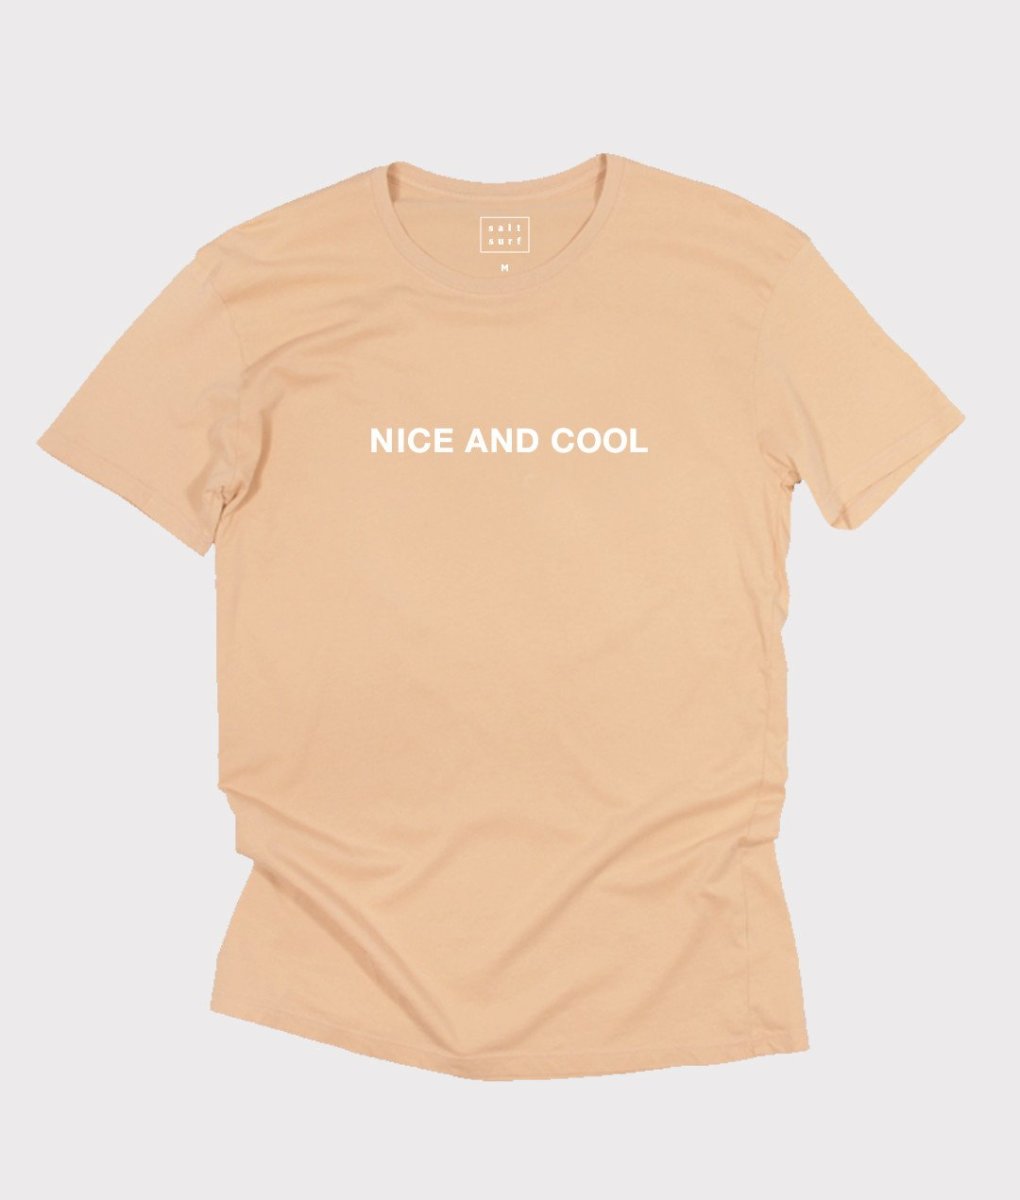 Nice and Cool Tee in Peach, $36, available at Salt Surf.